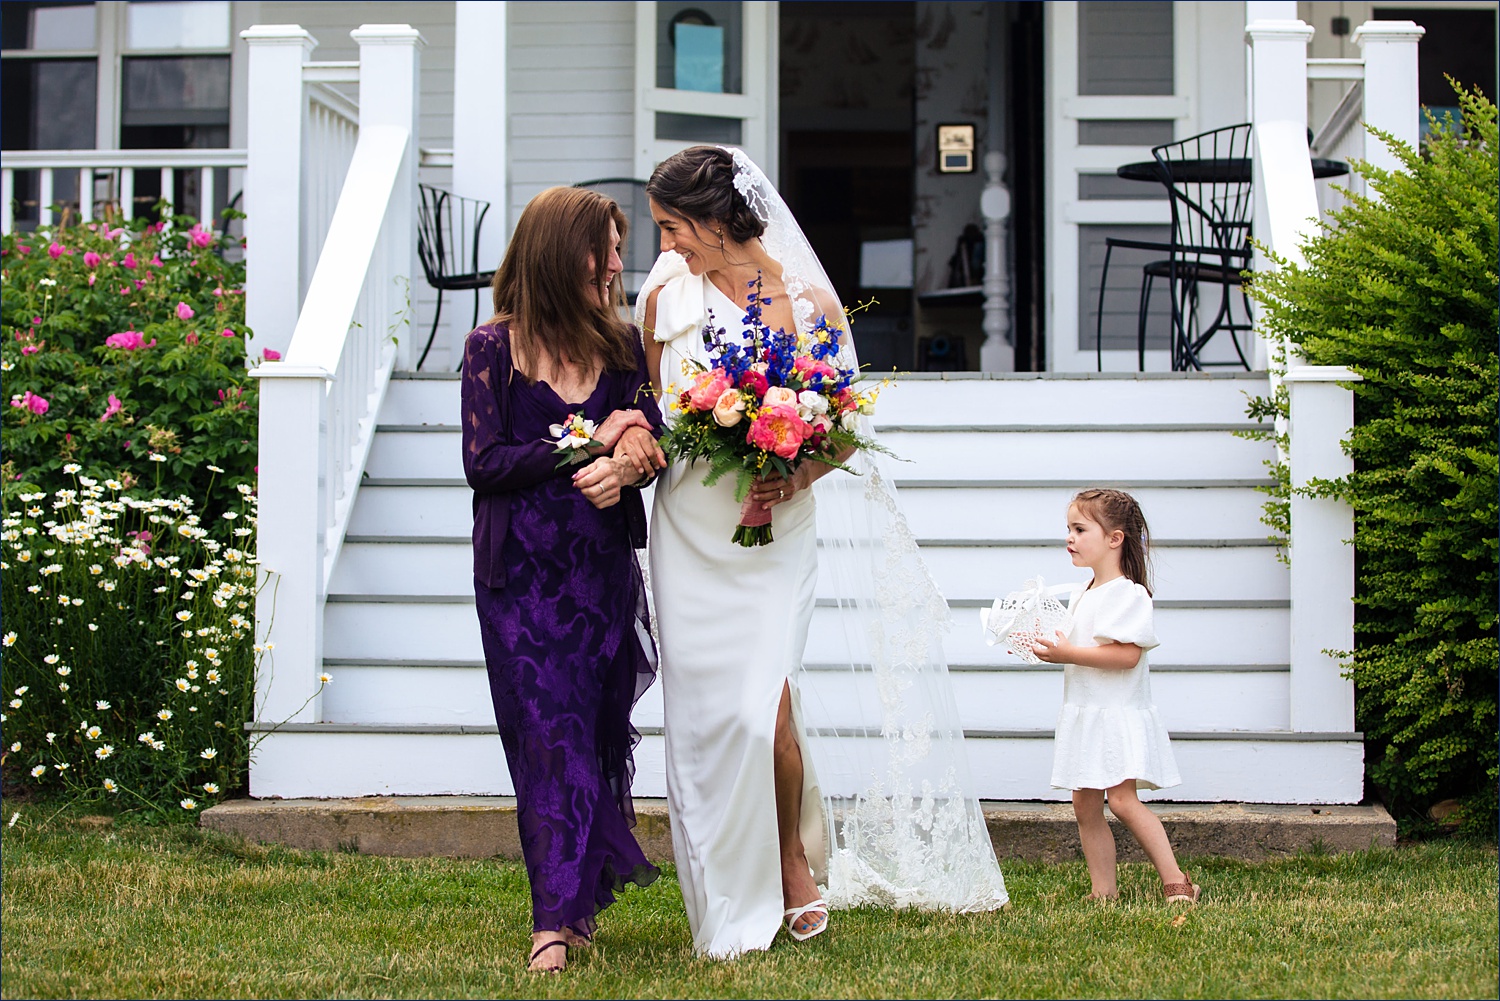 The mother of the bride walks her daughter down the aisle as a flower girl jumps back in to dump more petals in York Maine